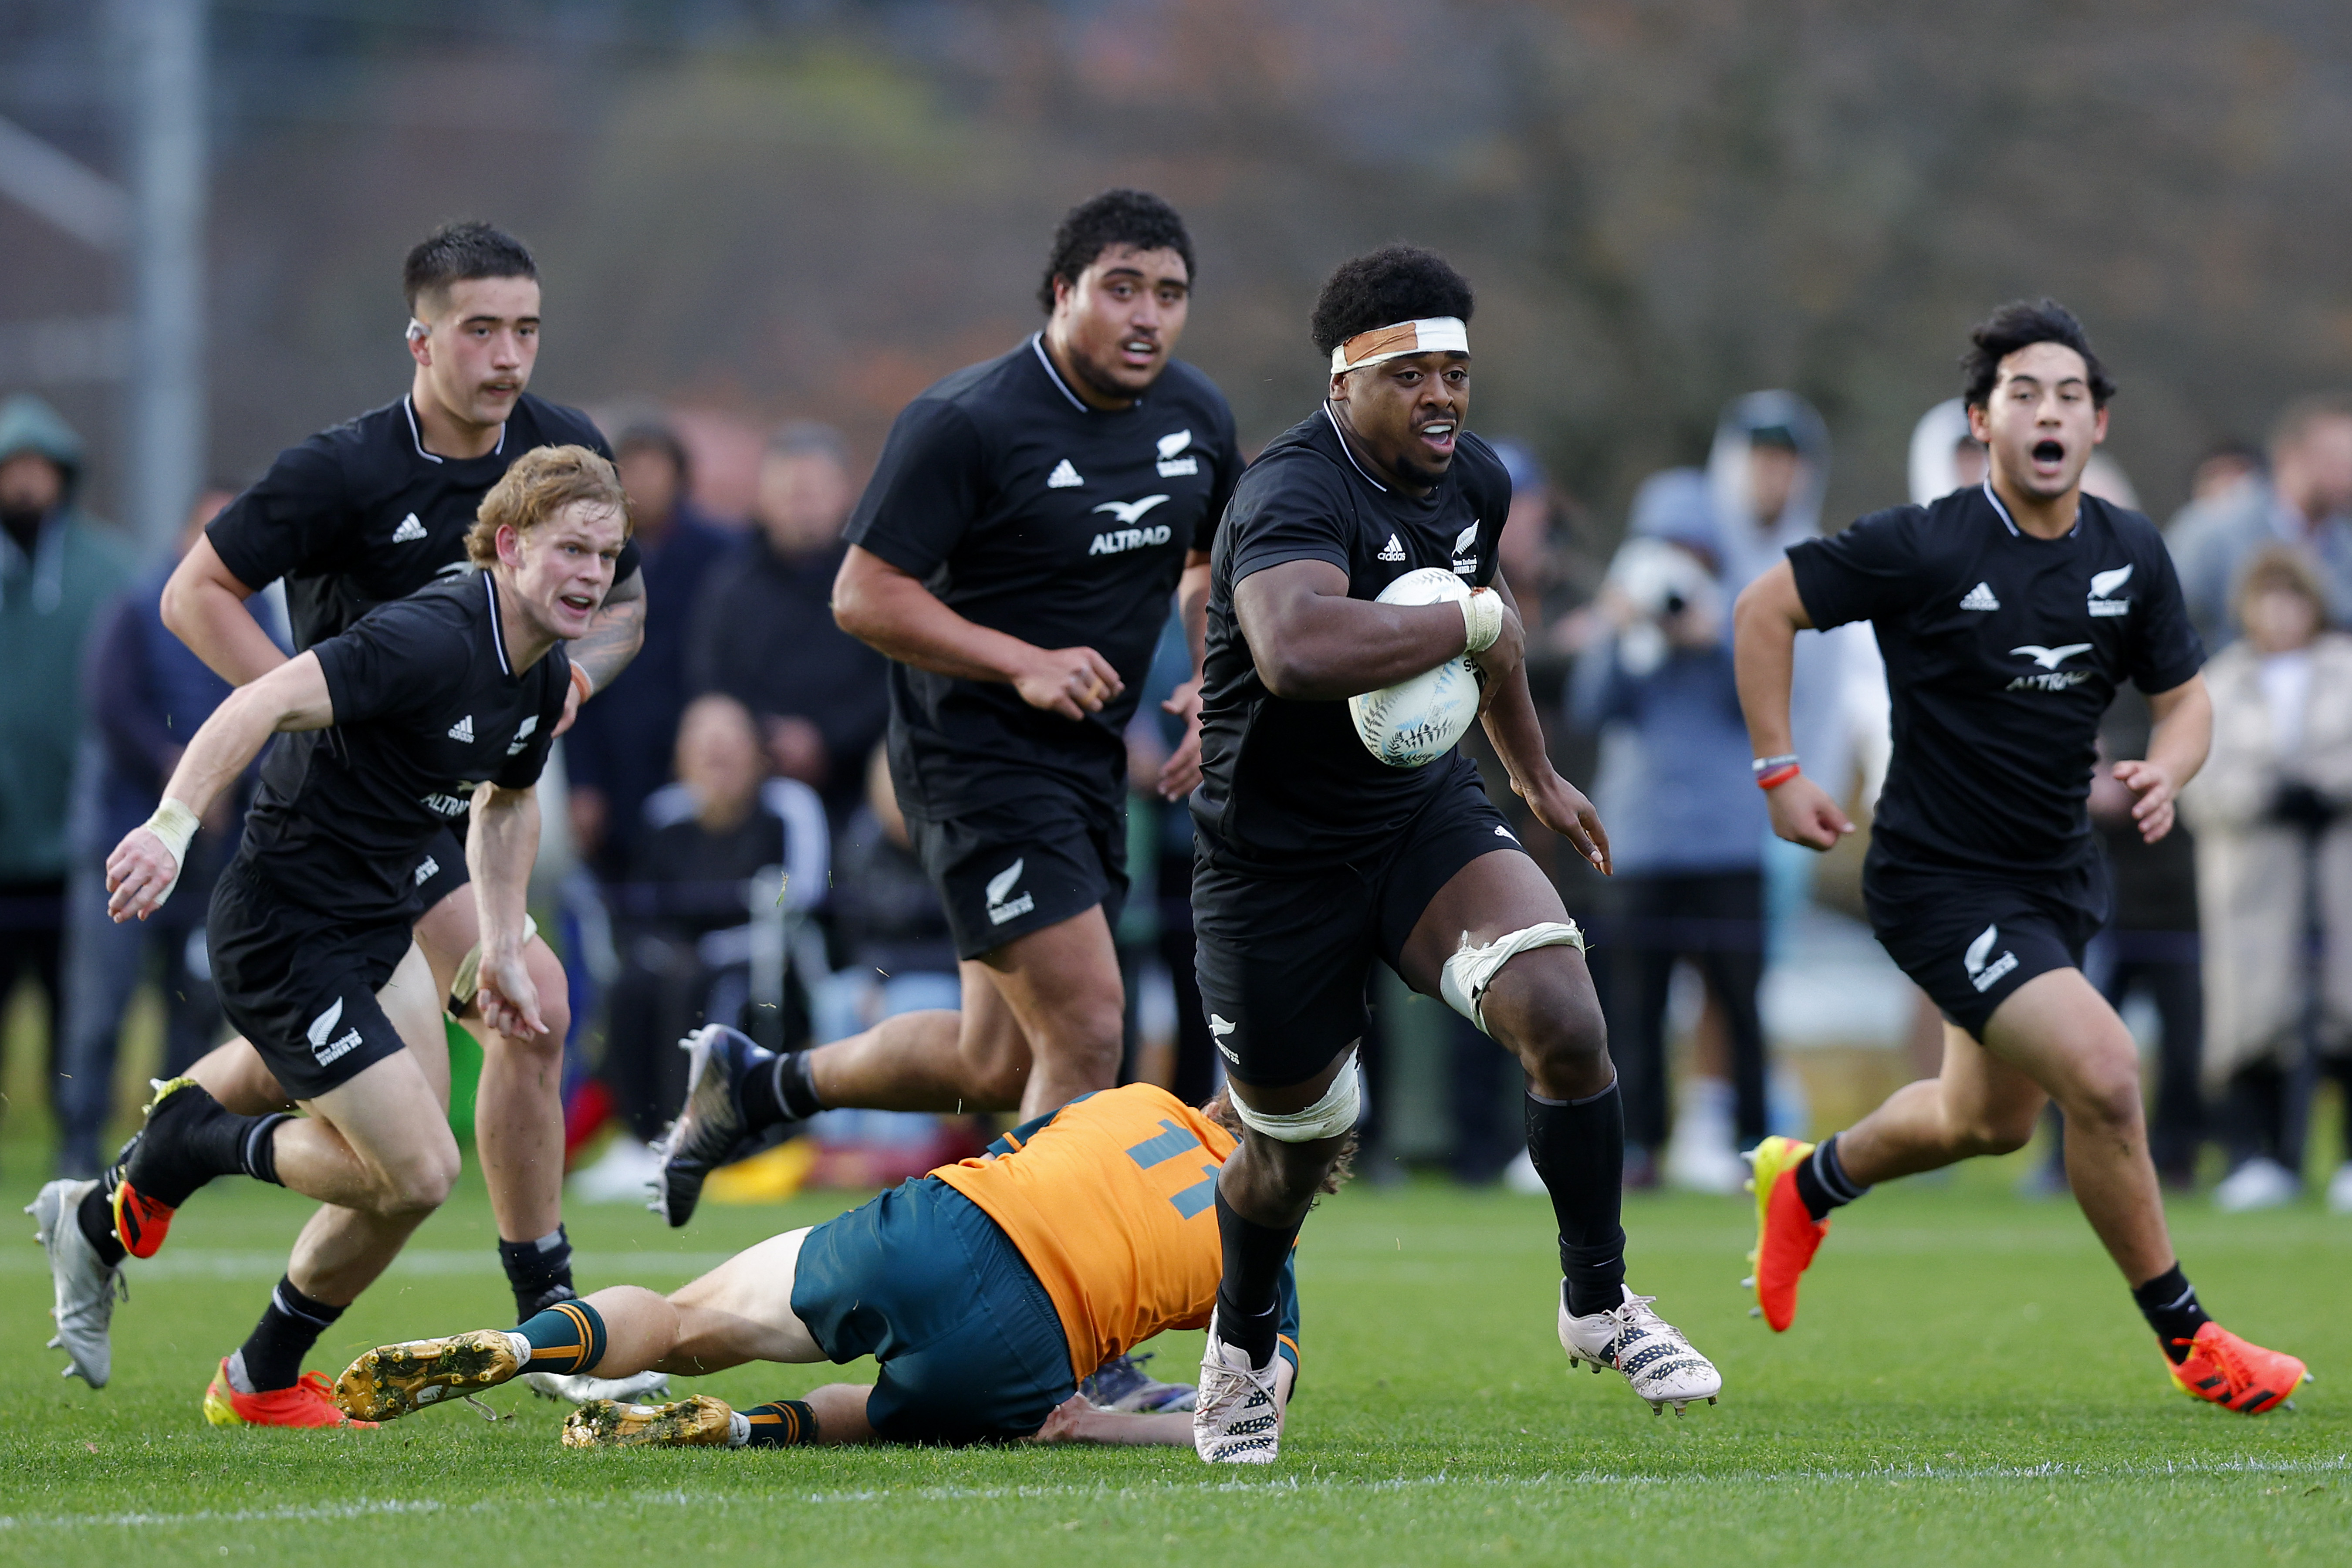 New Zealand Under 20 squad named for the World Rugby U20 Championship